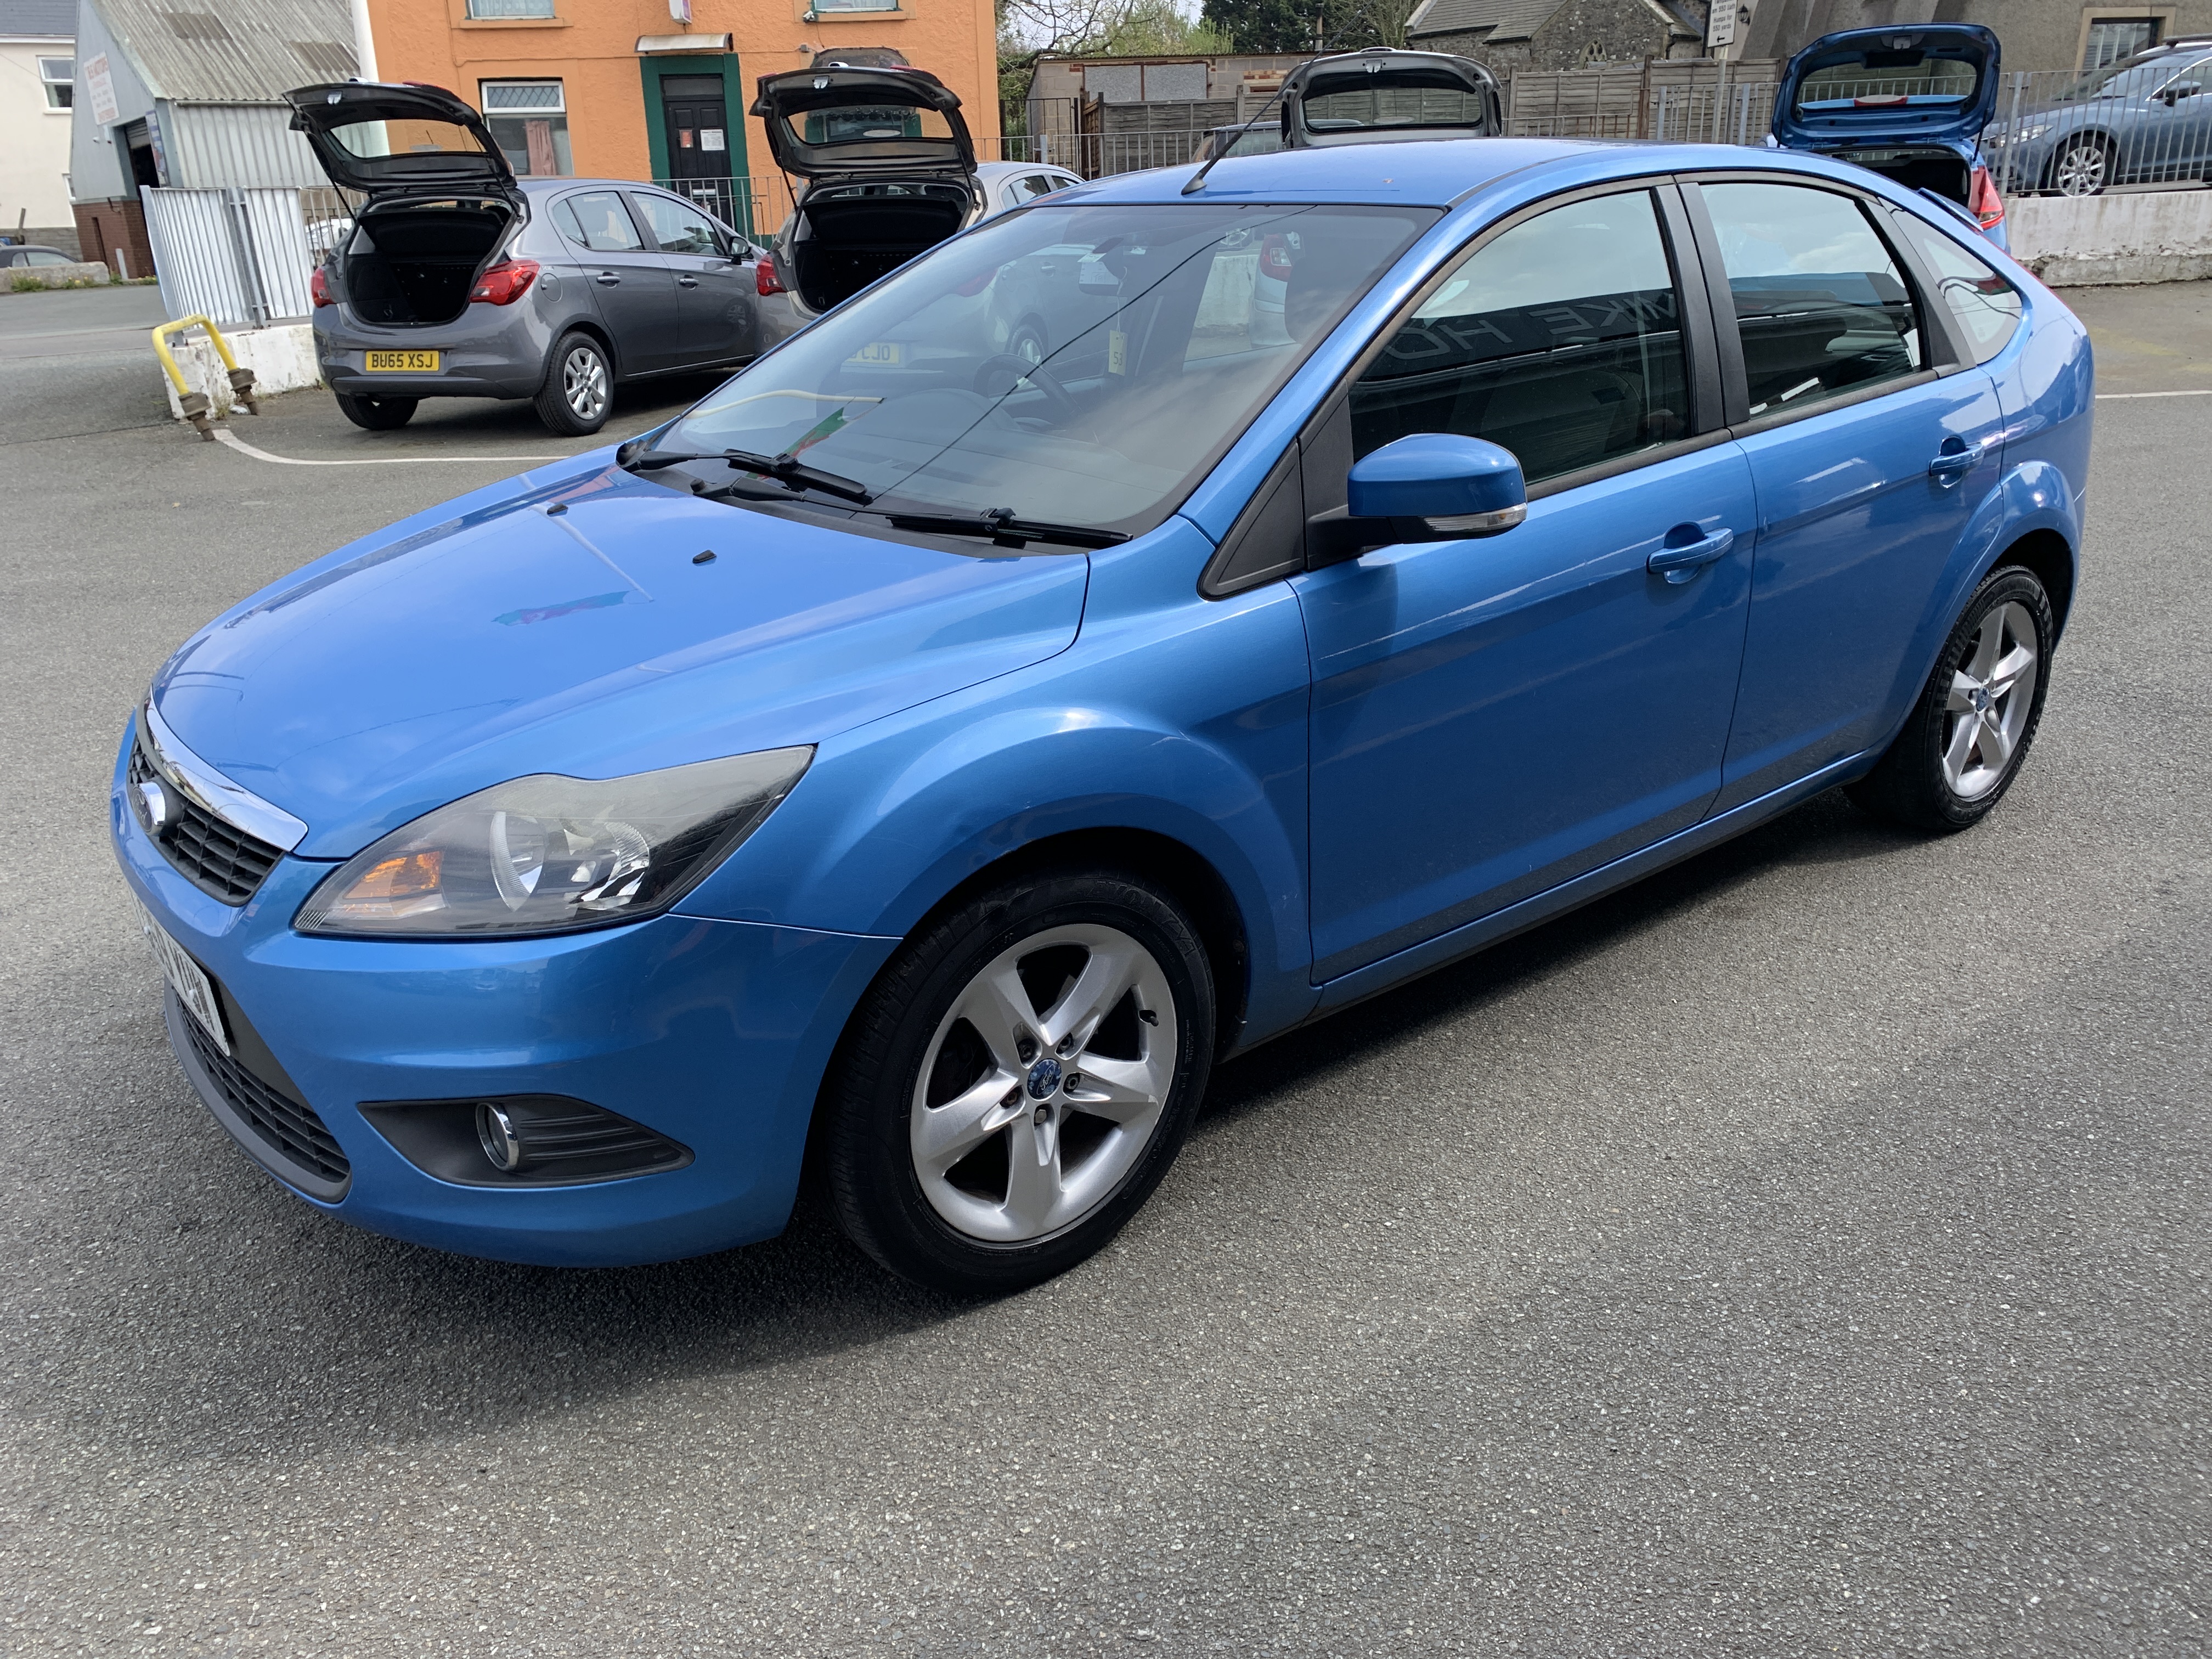 Ford FOCUS ZETEC 100  for sale at Mike Howlin Motor Sales Pembrokeshire